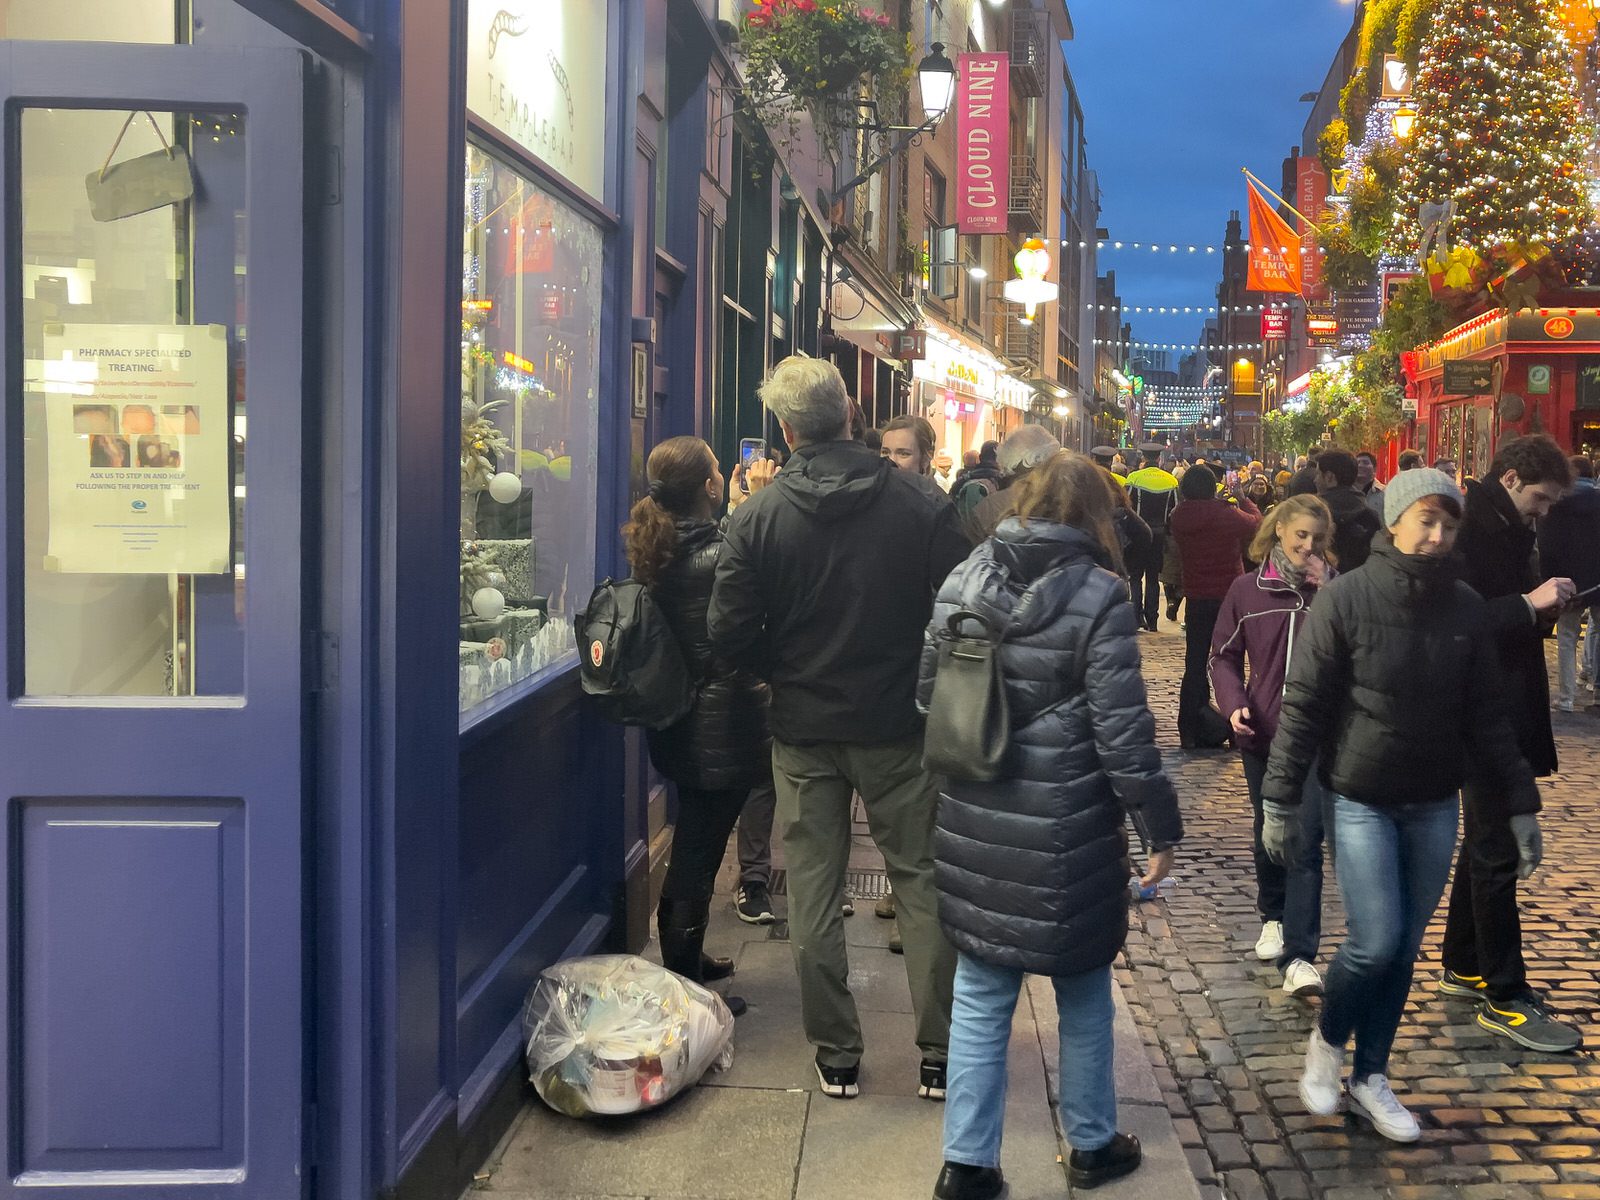 I VISITED TEMPLE BAR TODAY [AS NIGHTFALL WAS APPROACHING]-225358-1